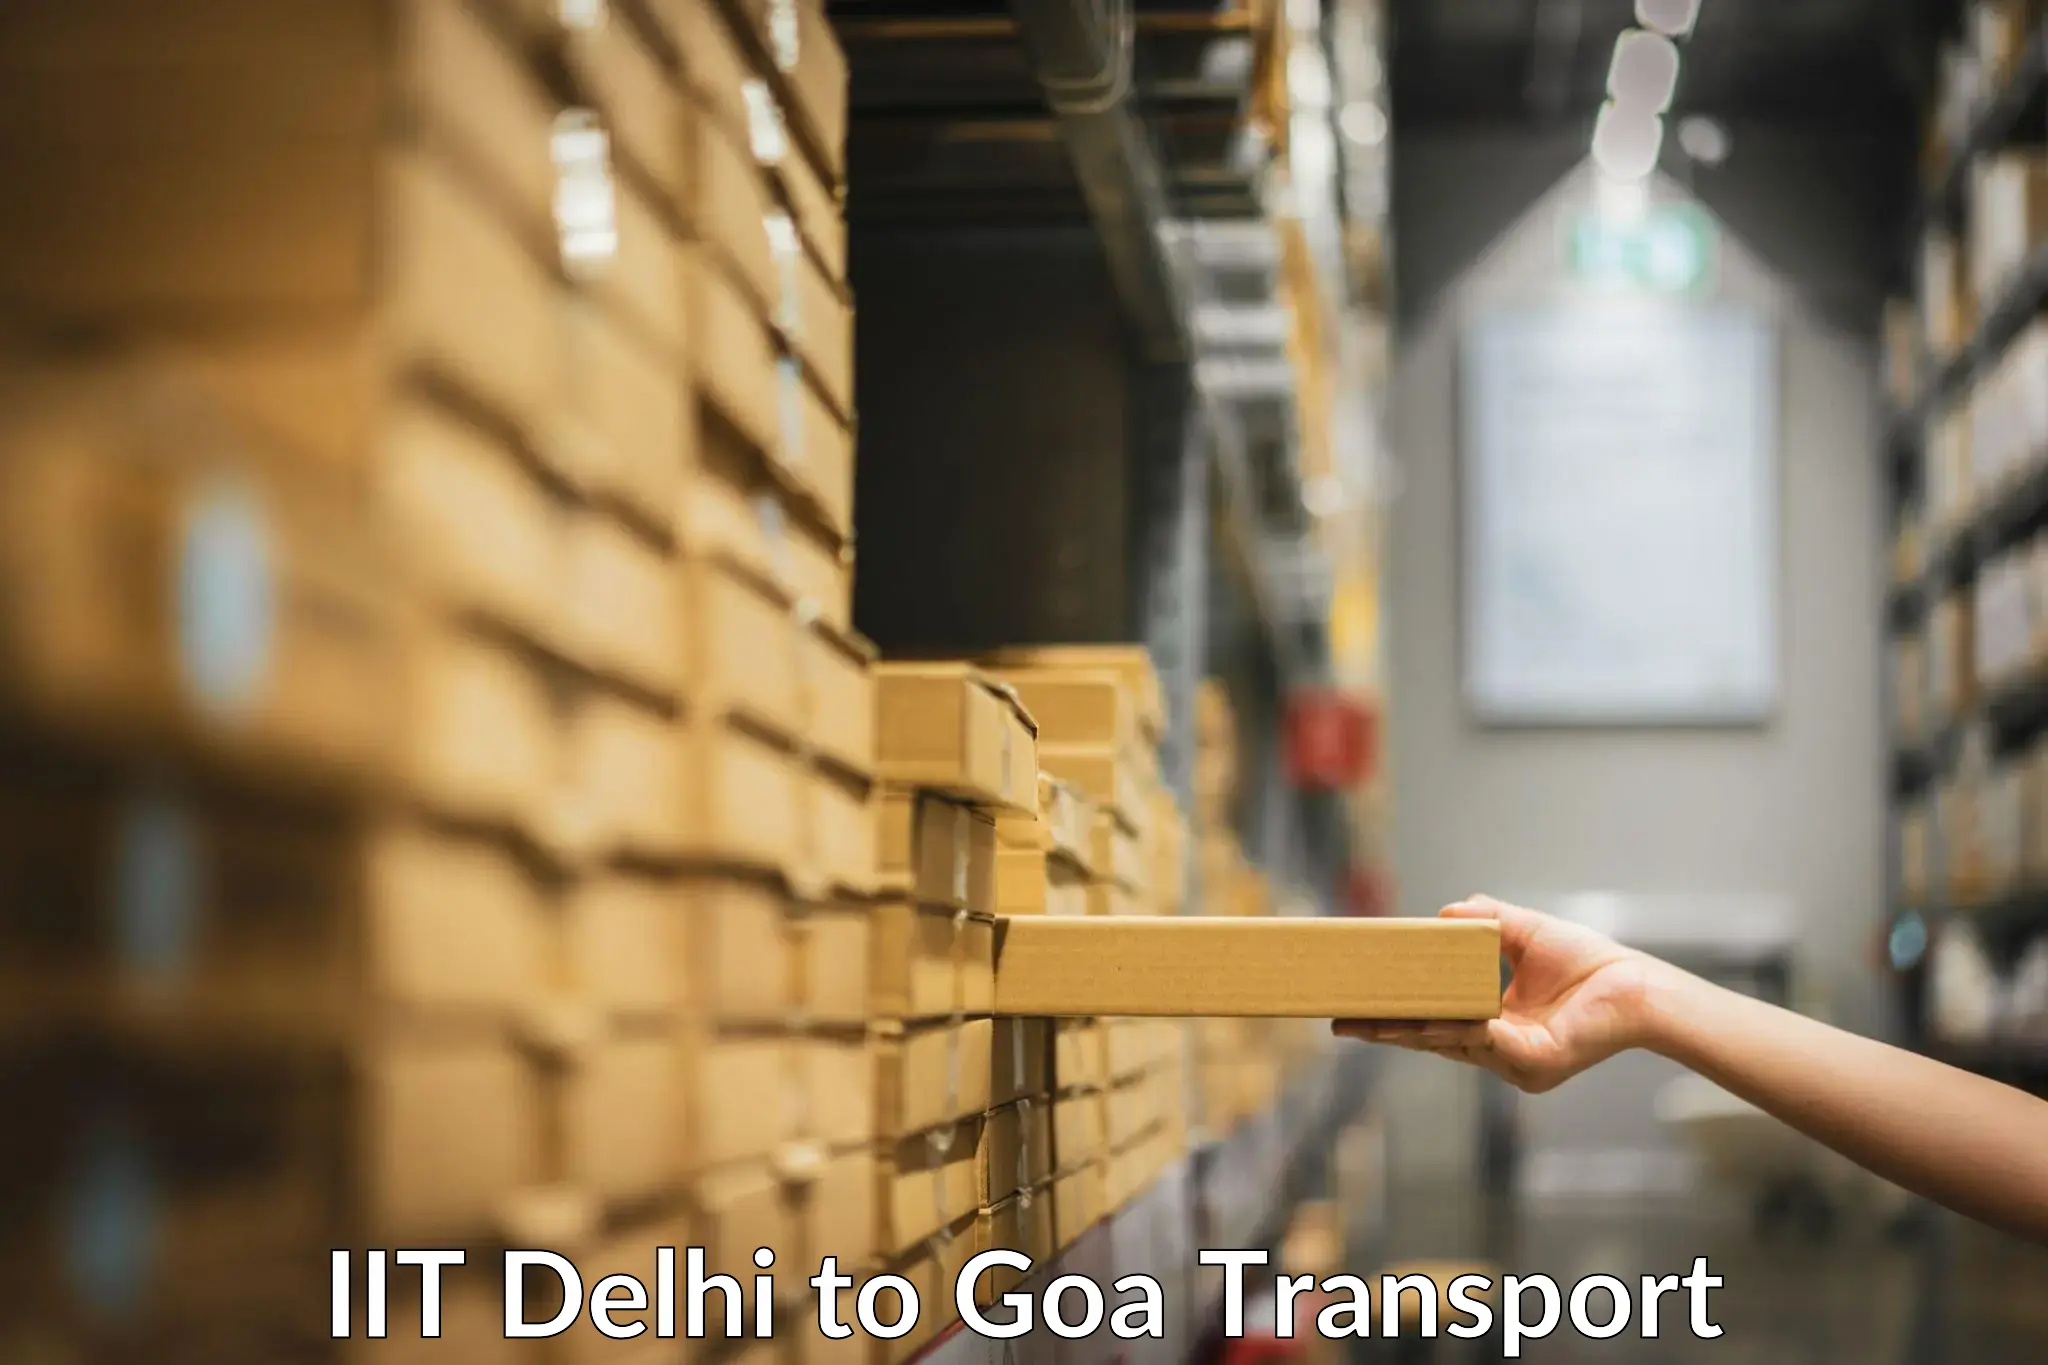 Container transport service IIT Delhi to Margao